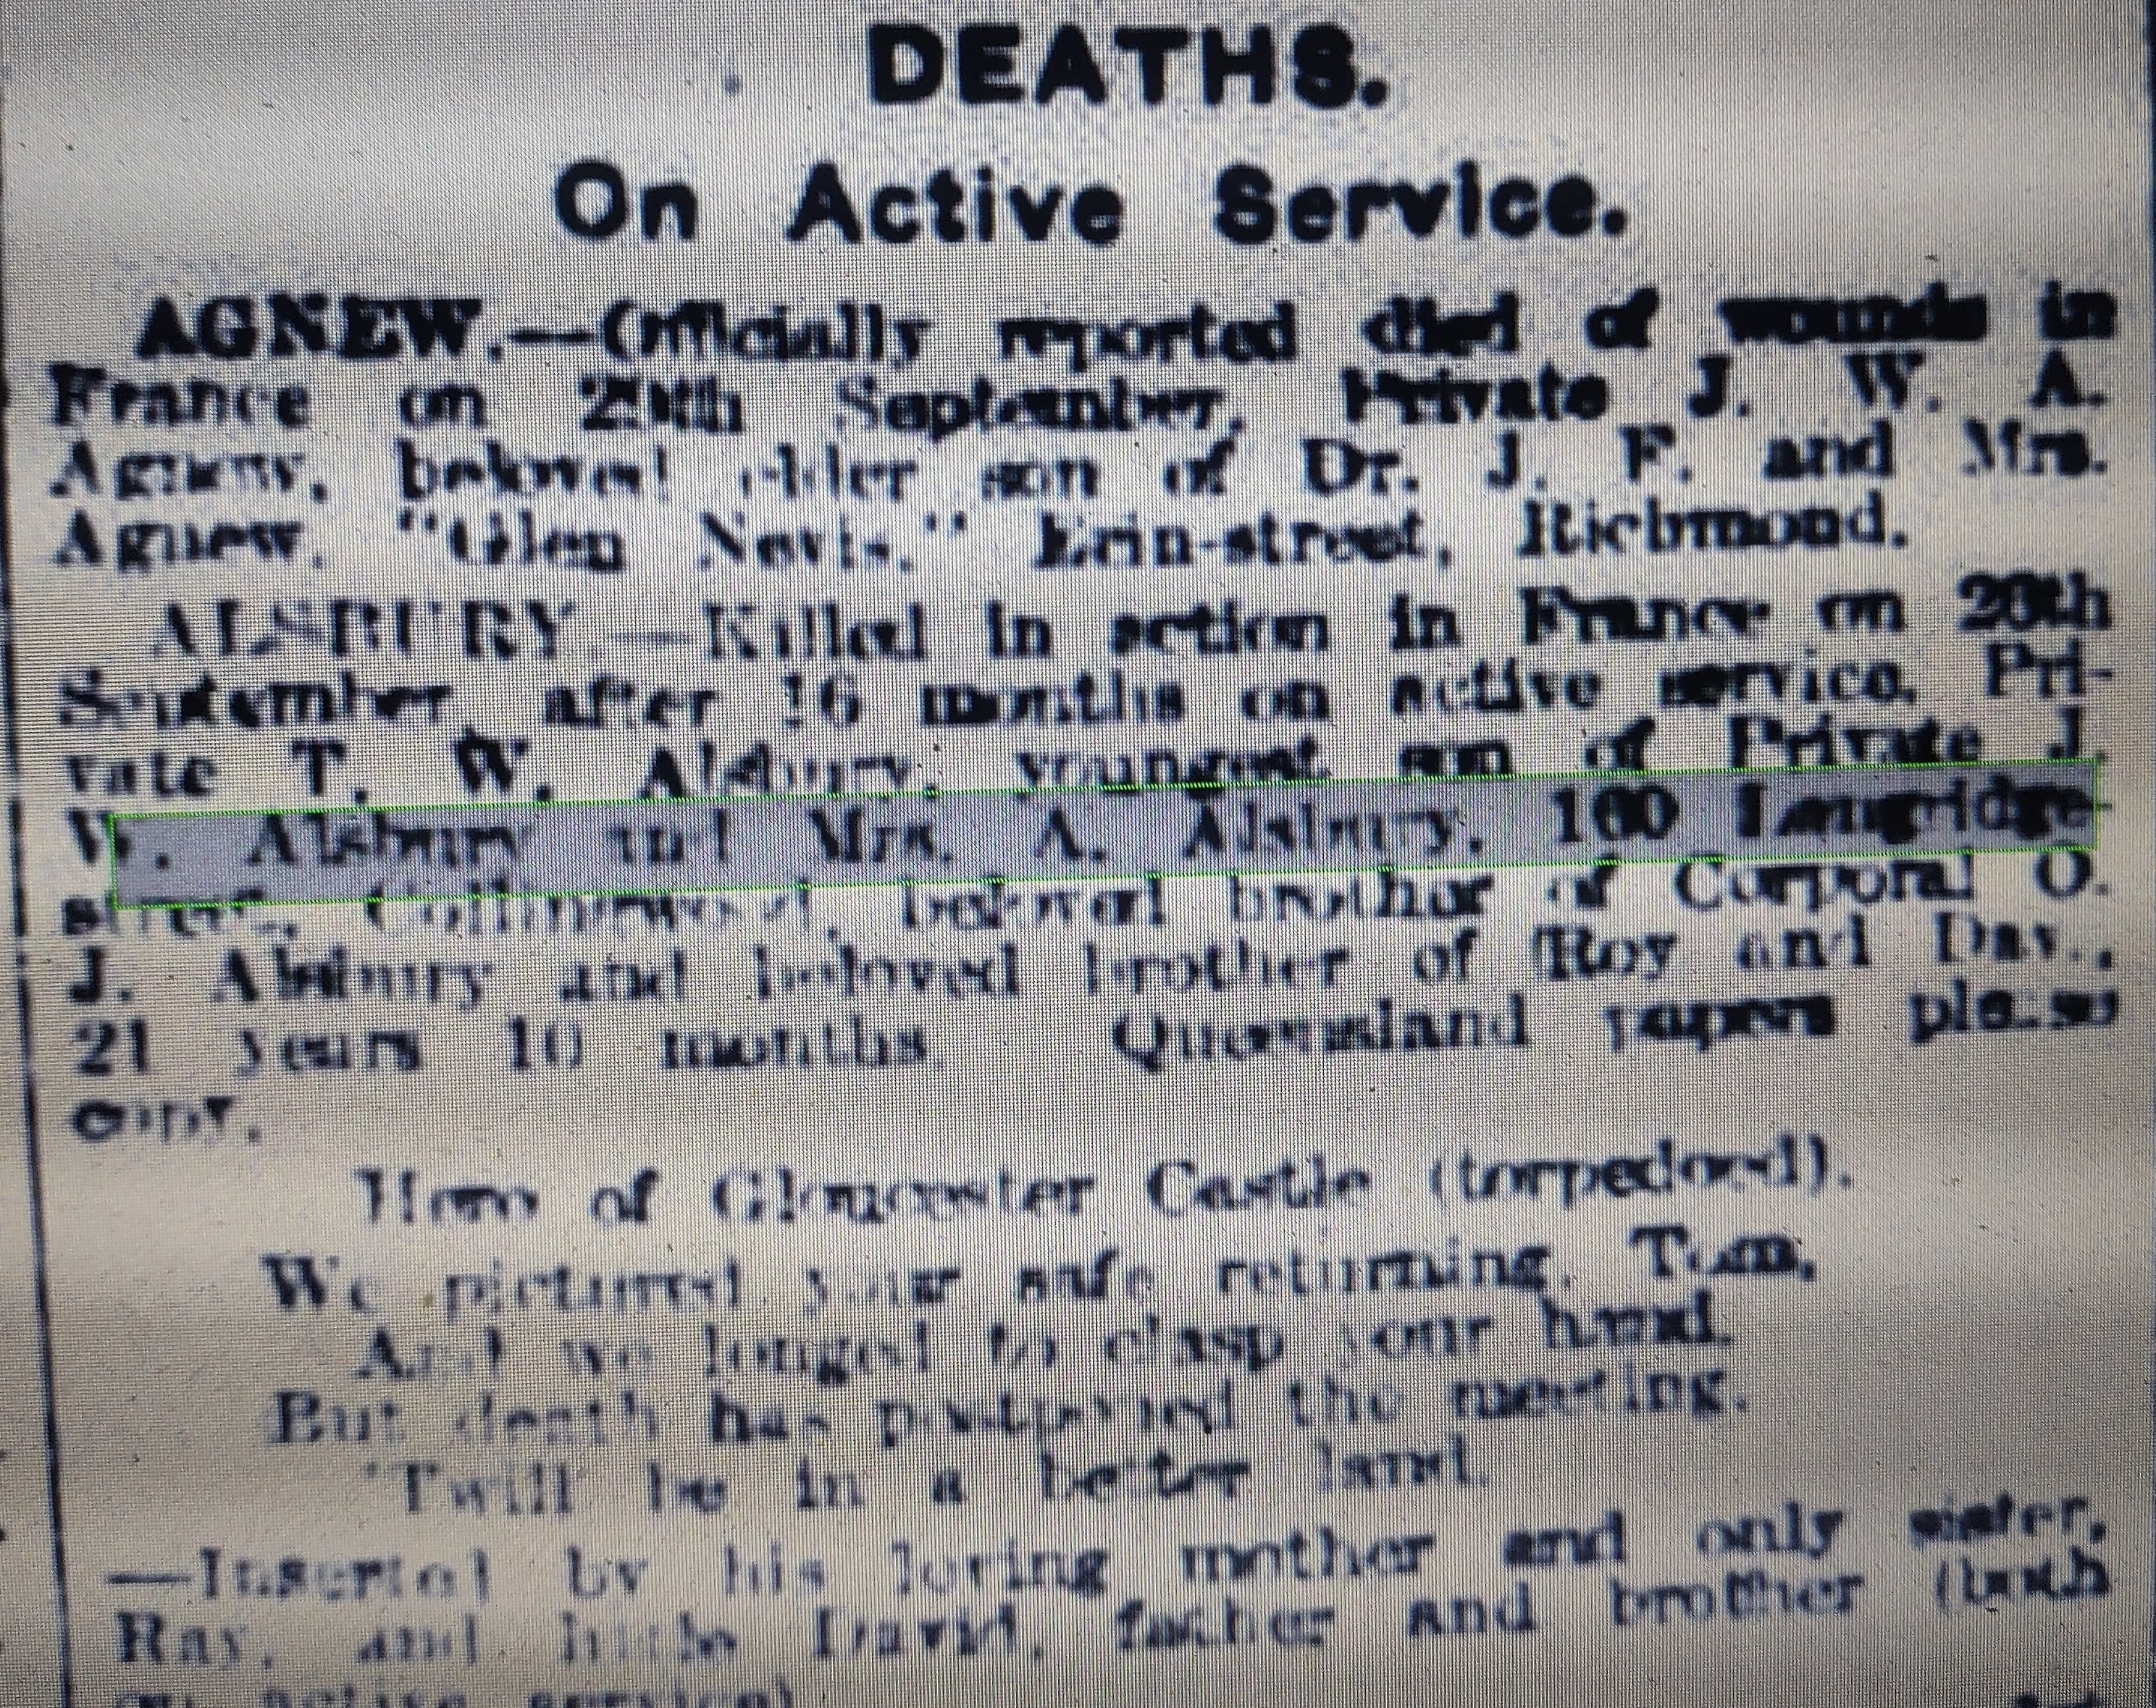 Australian Newspaper Death notice for Thomas William Asbury a.k.a. Pro Boxer "Lal Buisst" 